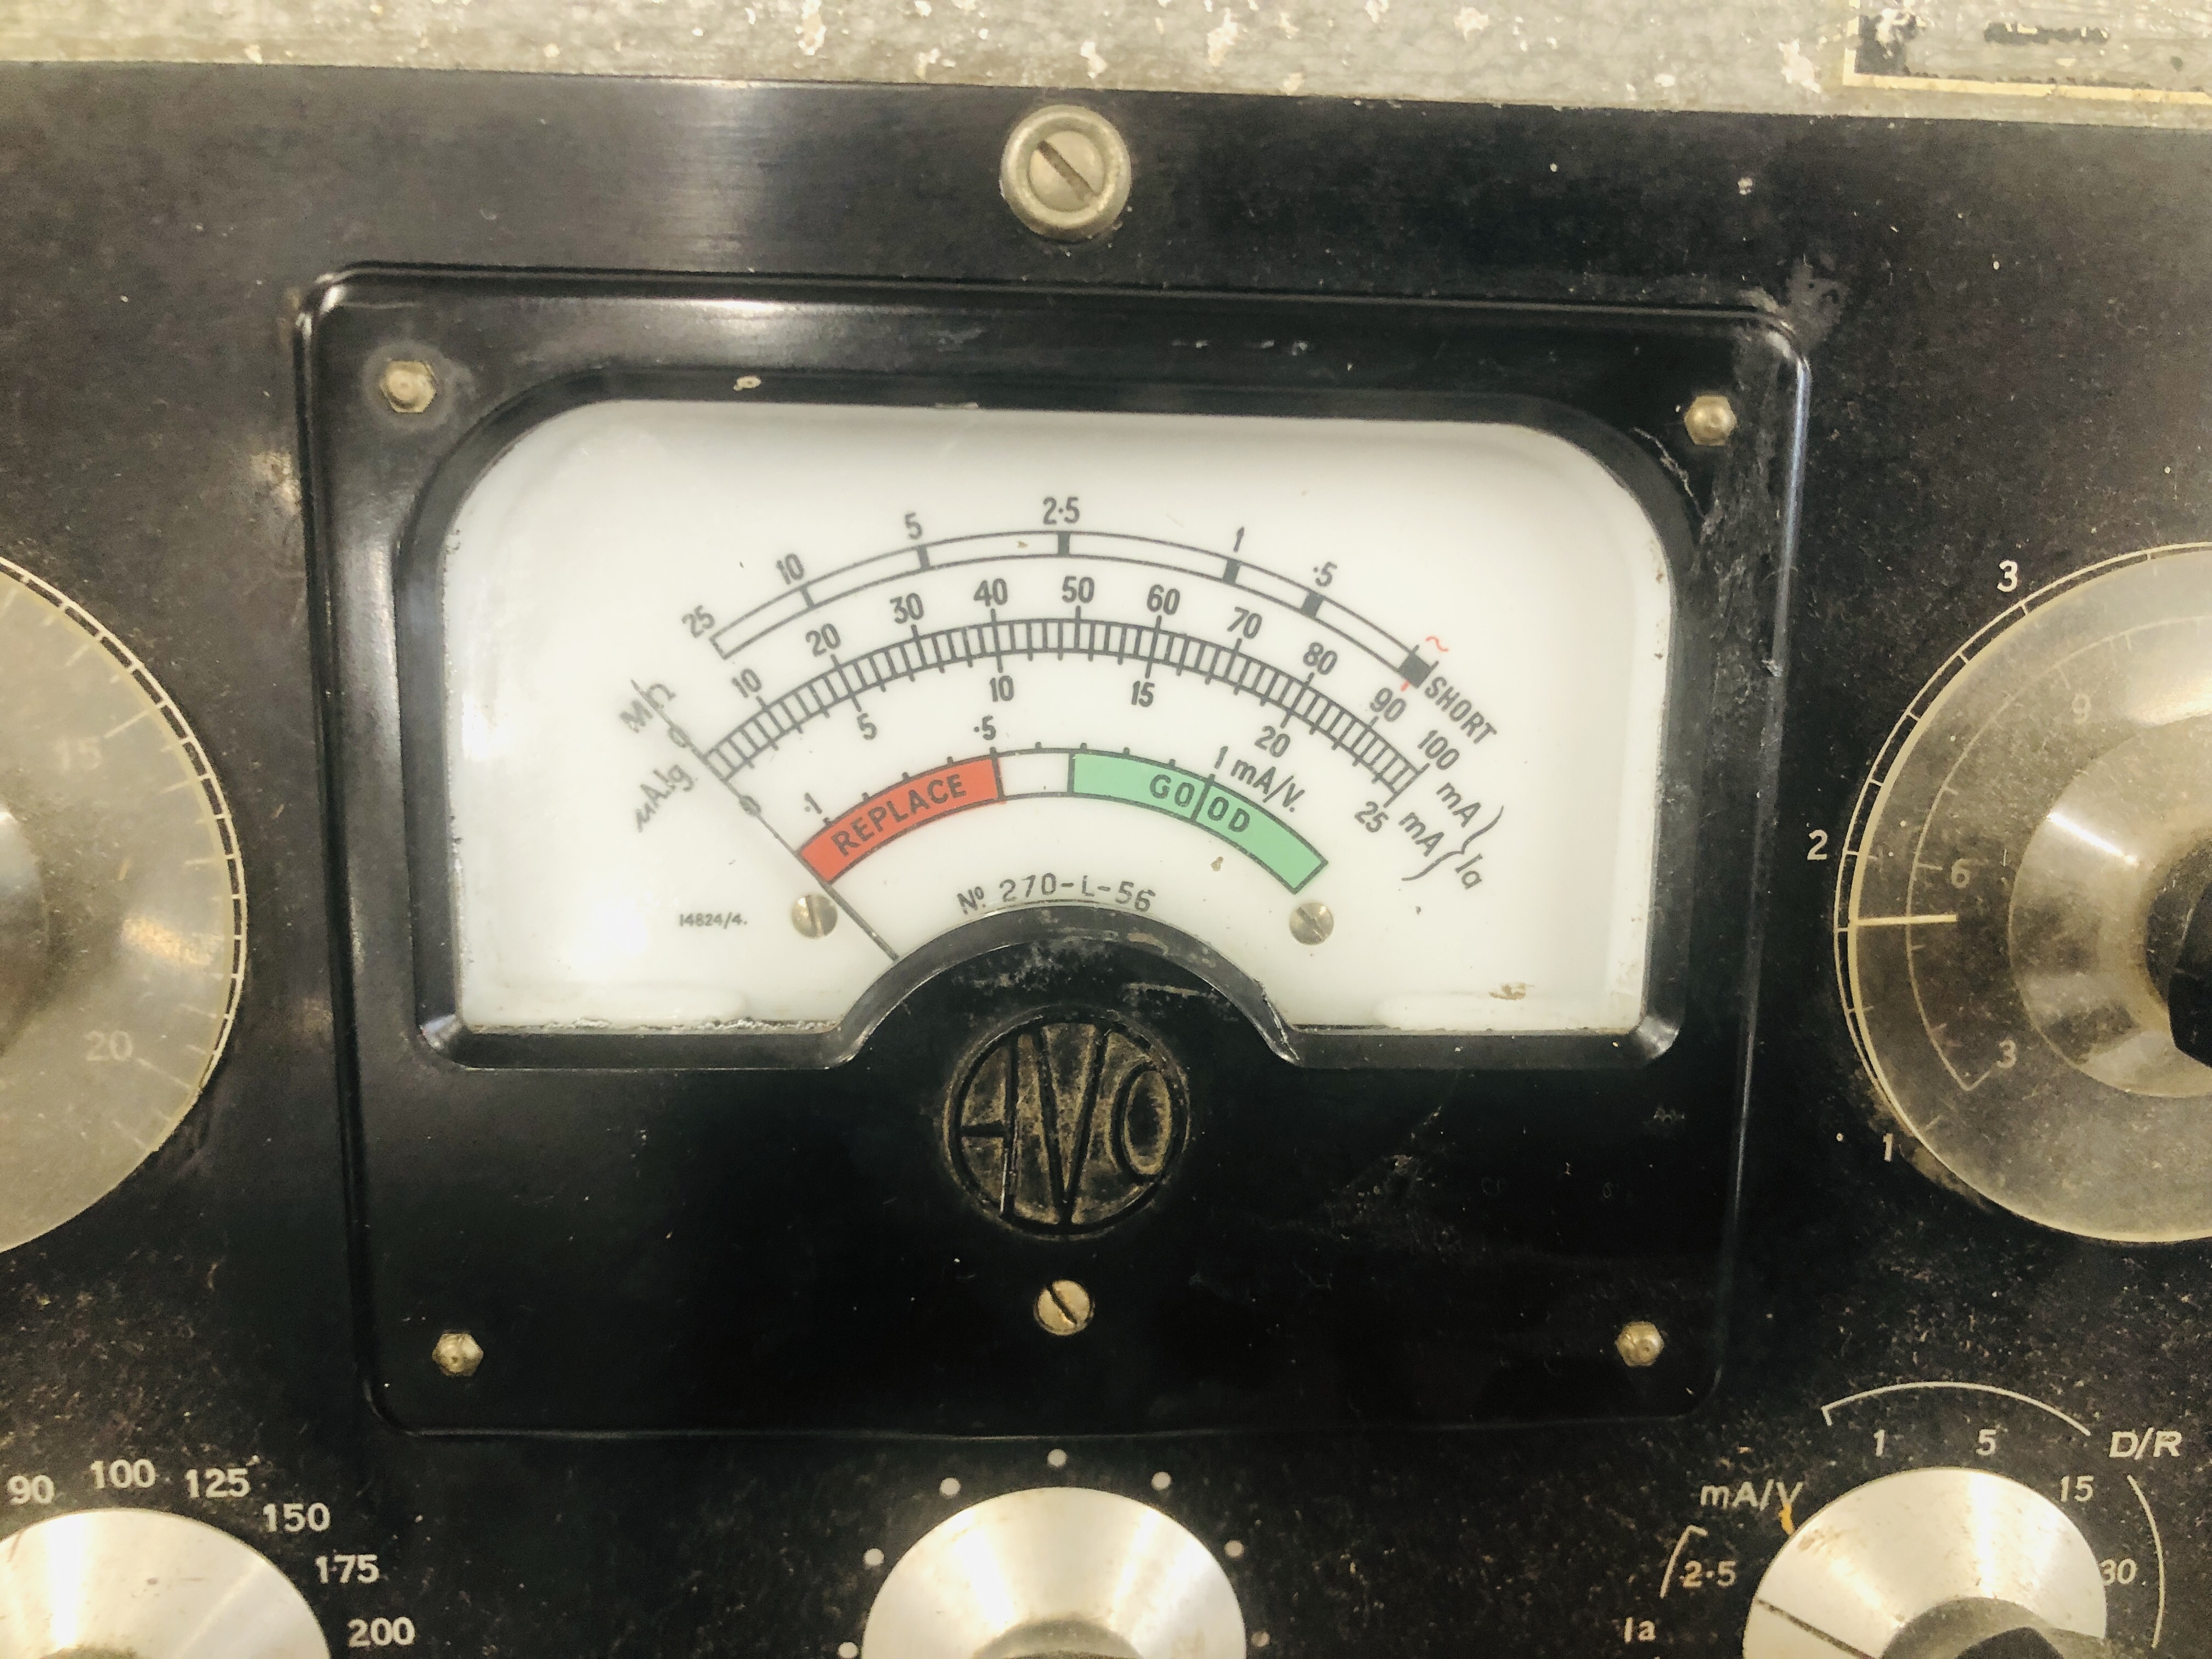 AVO LTD VALVE CHARACTERISTIC METER WITH ORIGINAL VALVE DATA MANUAL - COLLECTORS ITEM ONLY. - Image 3 of 7